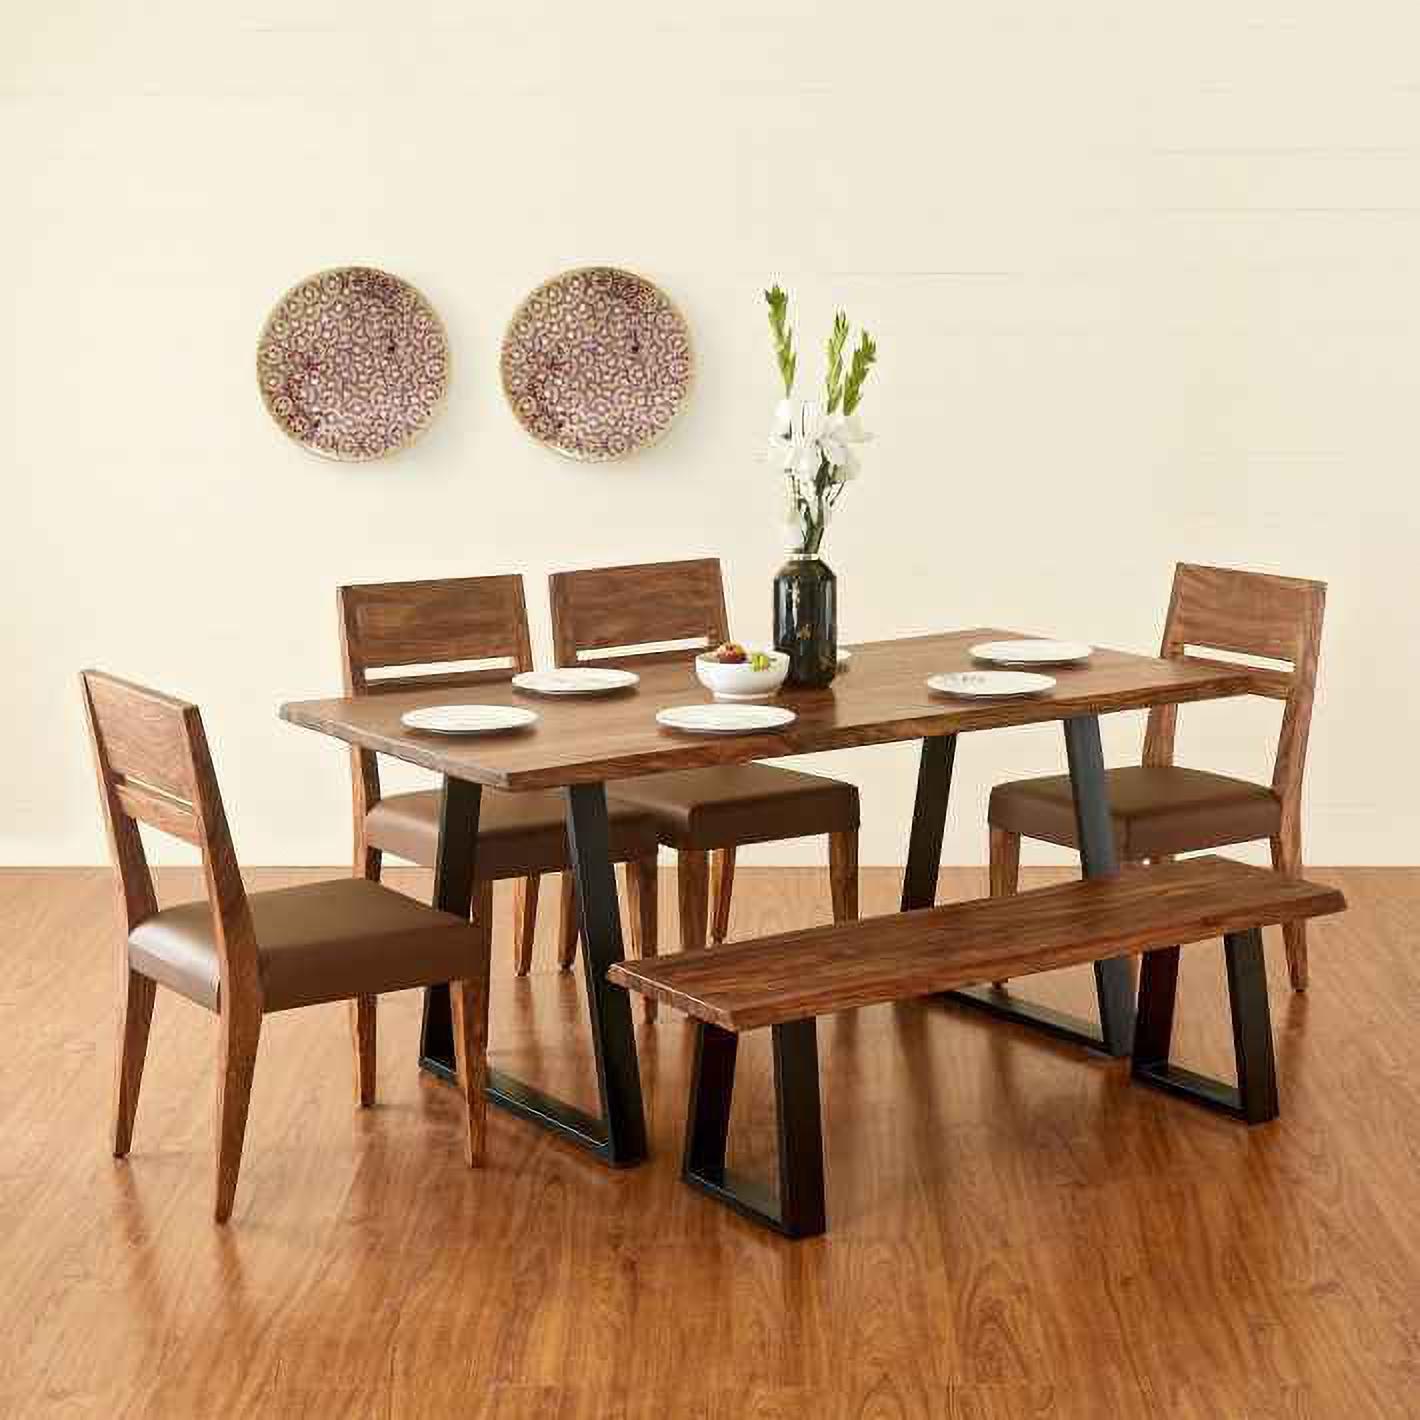 Aaram By Zebrs Dining Table Set With 4 Chairs And 1 Bench Solid Wood 6 Seater Dining Set (Finish Color -Honey Finish, DIY(Do-It-Yourself))